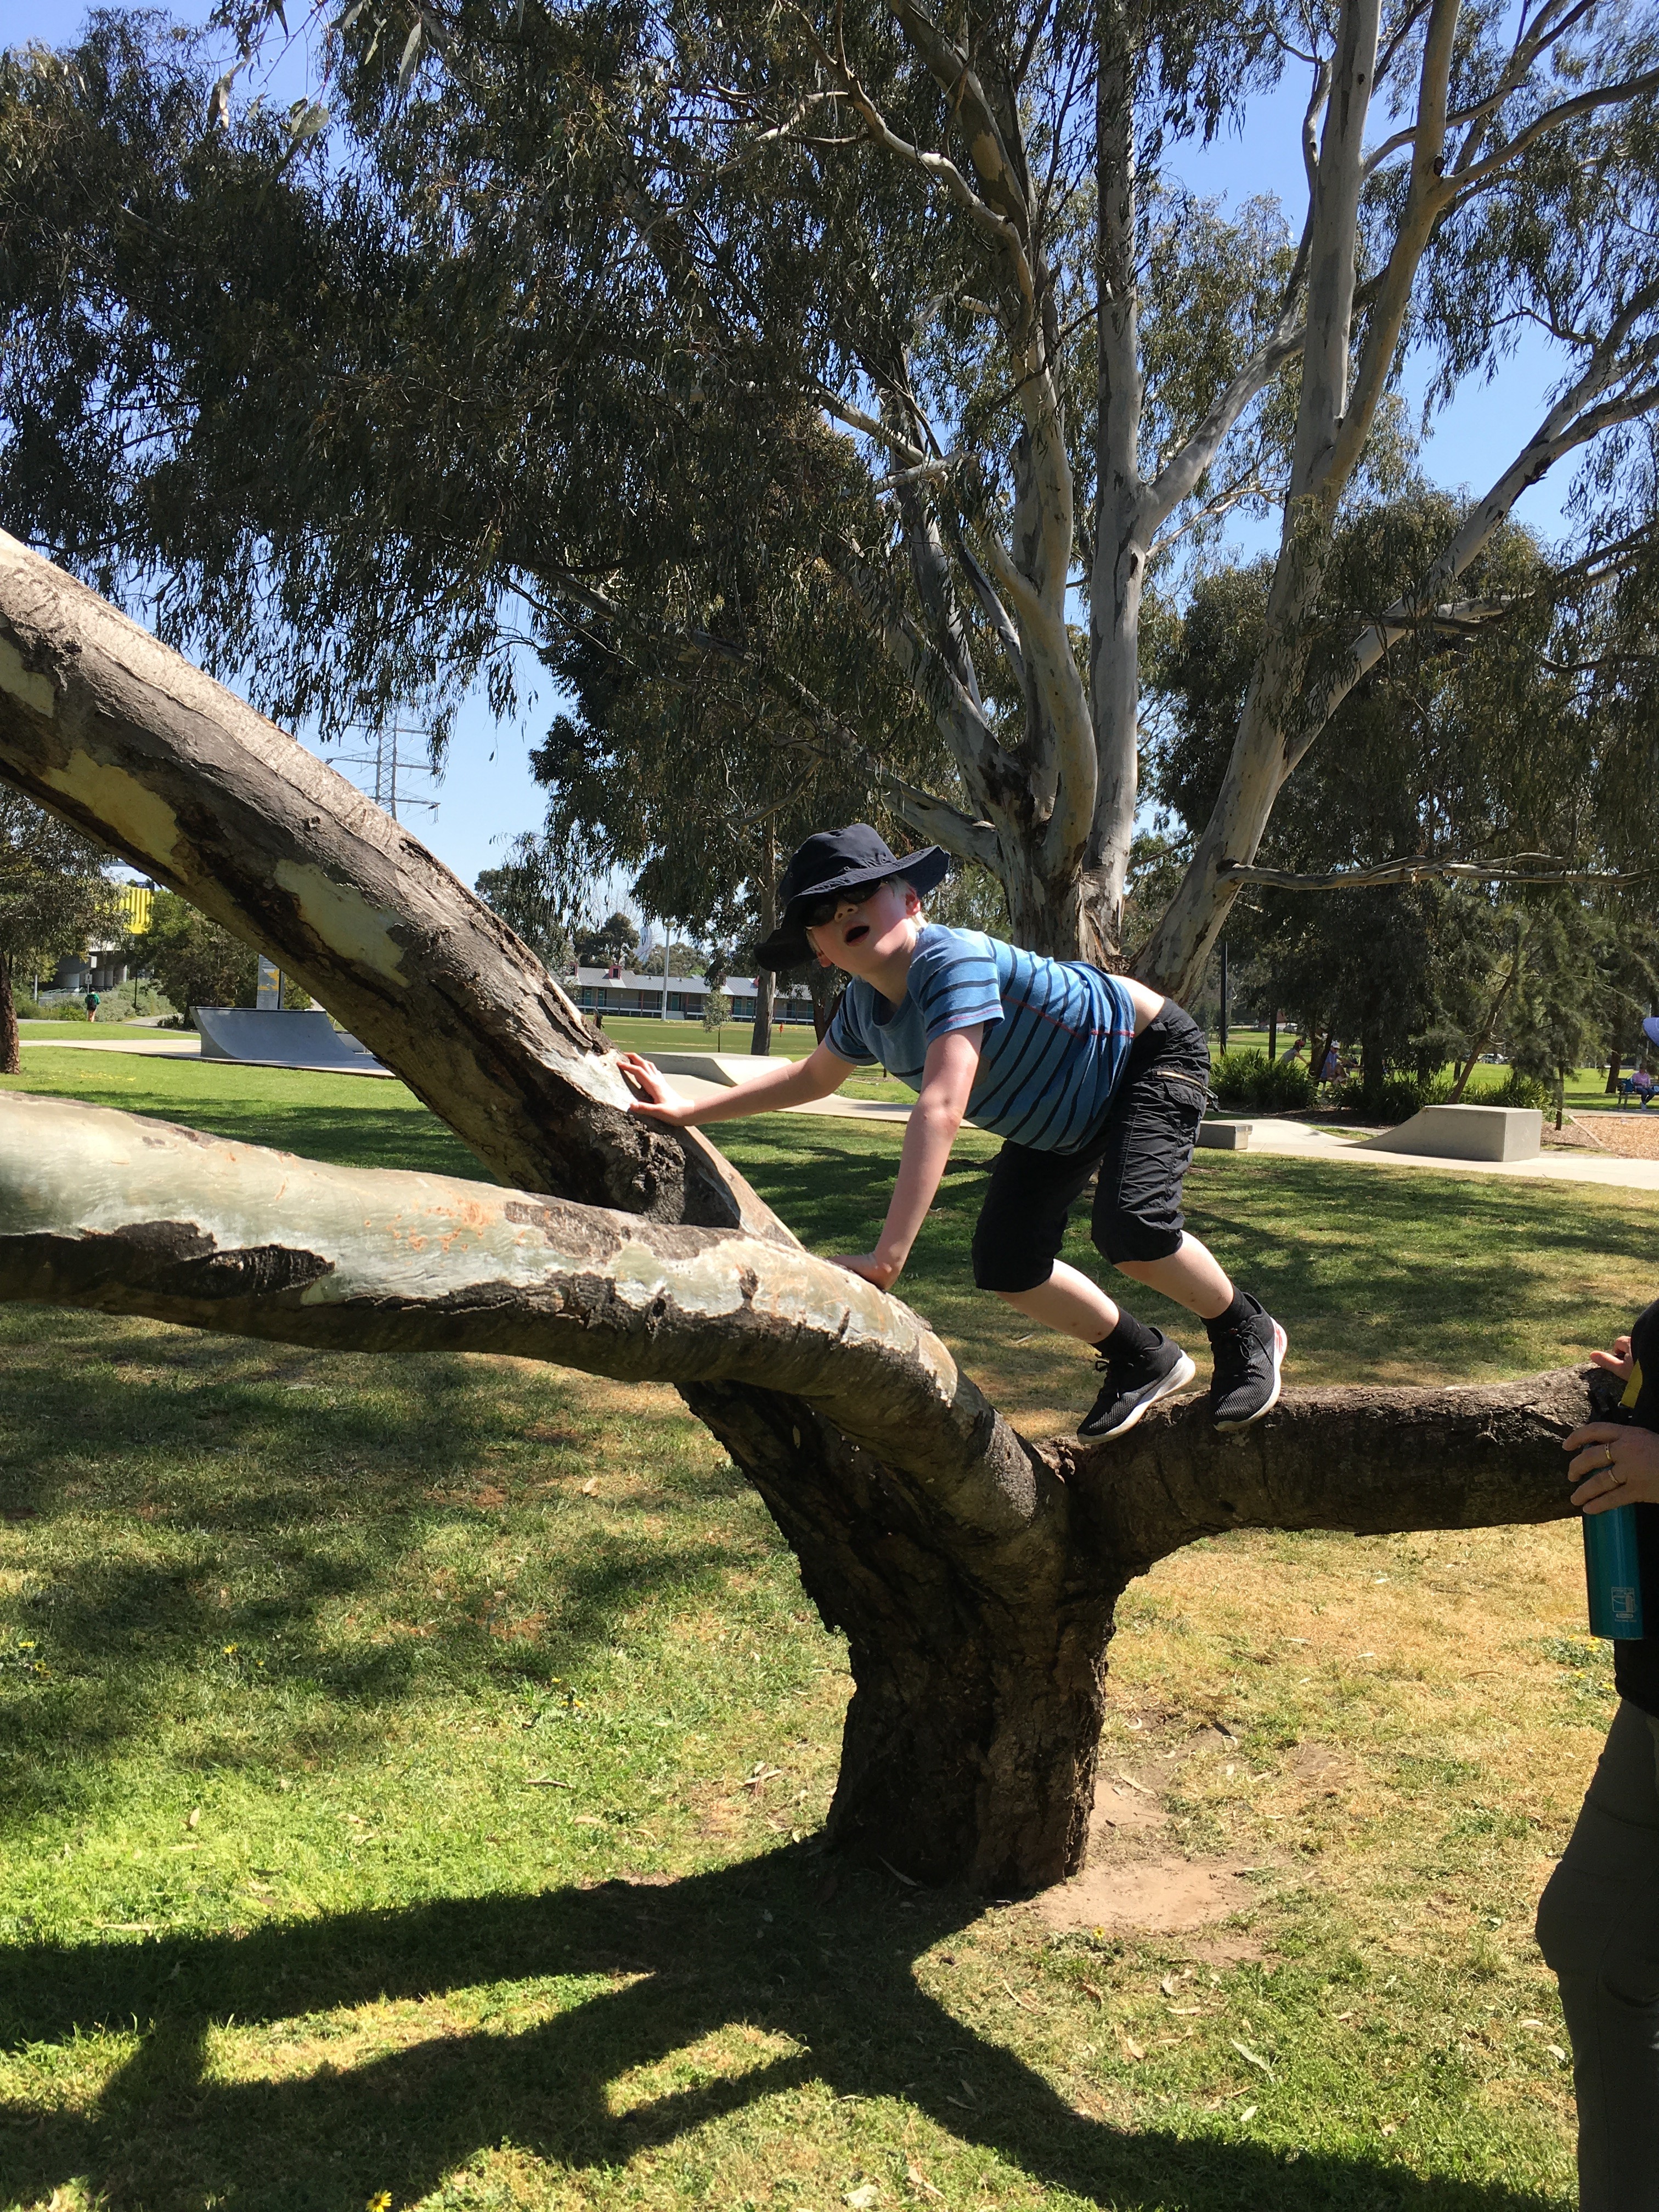 Boy climbing on a tree branch at a local park nearby